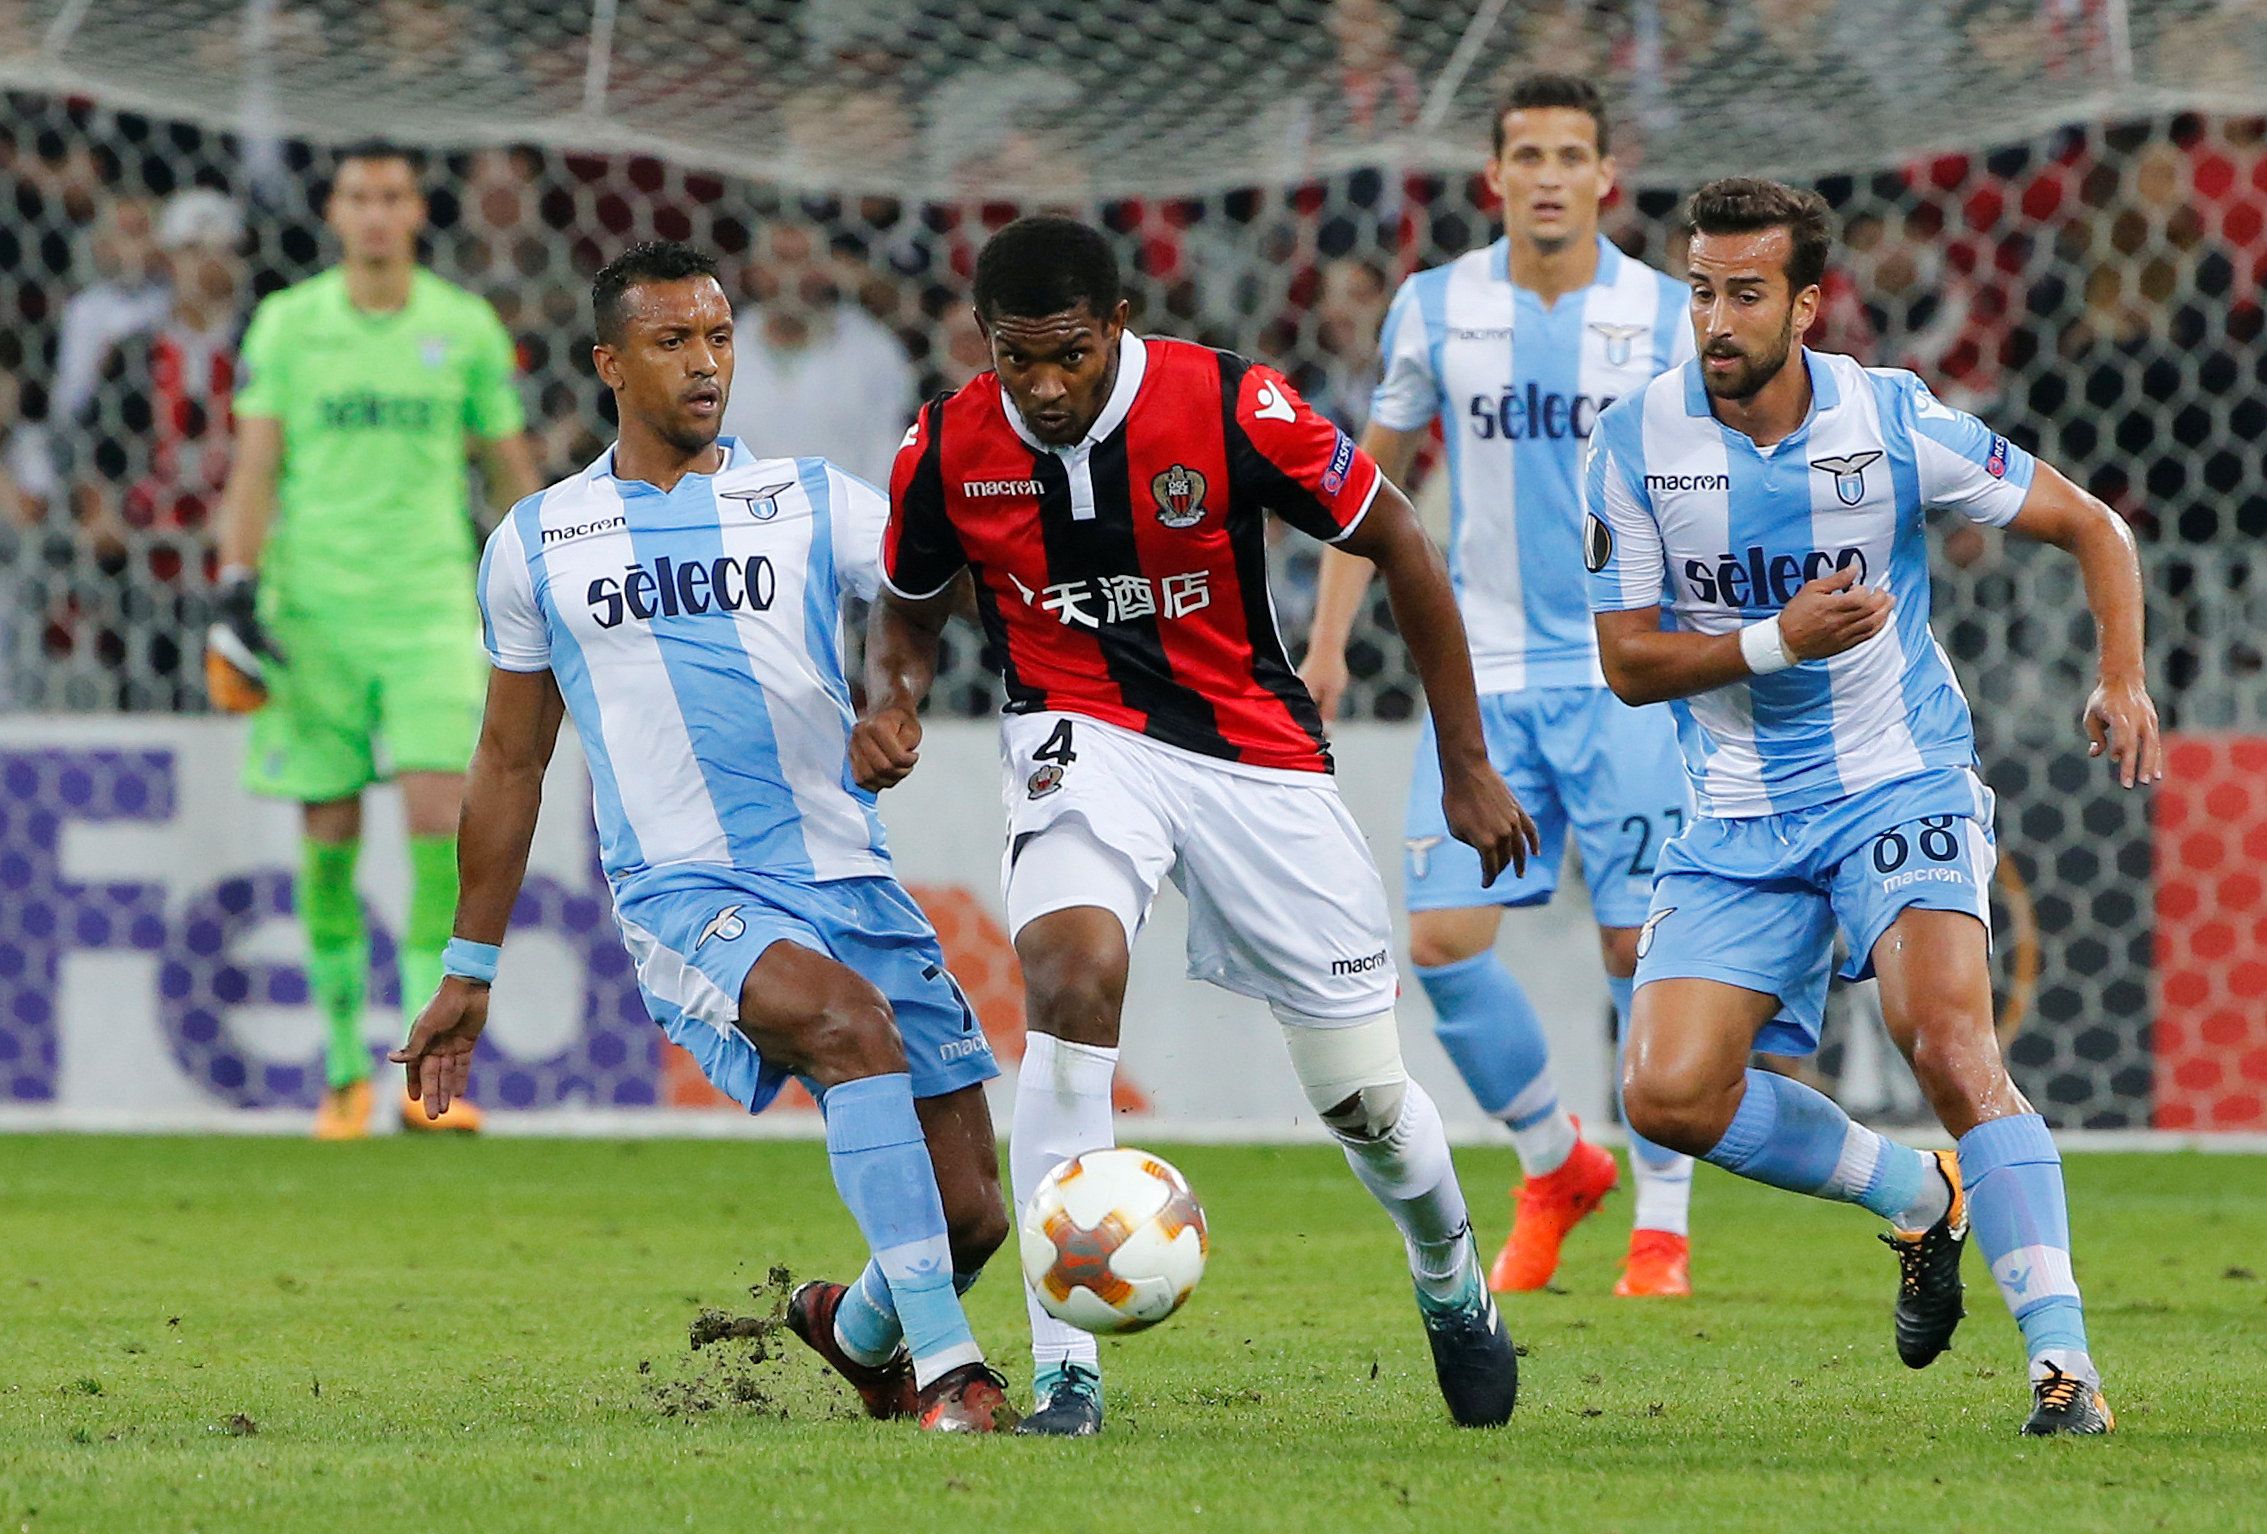 Marlon in action for Nice